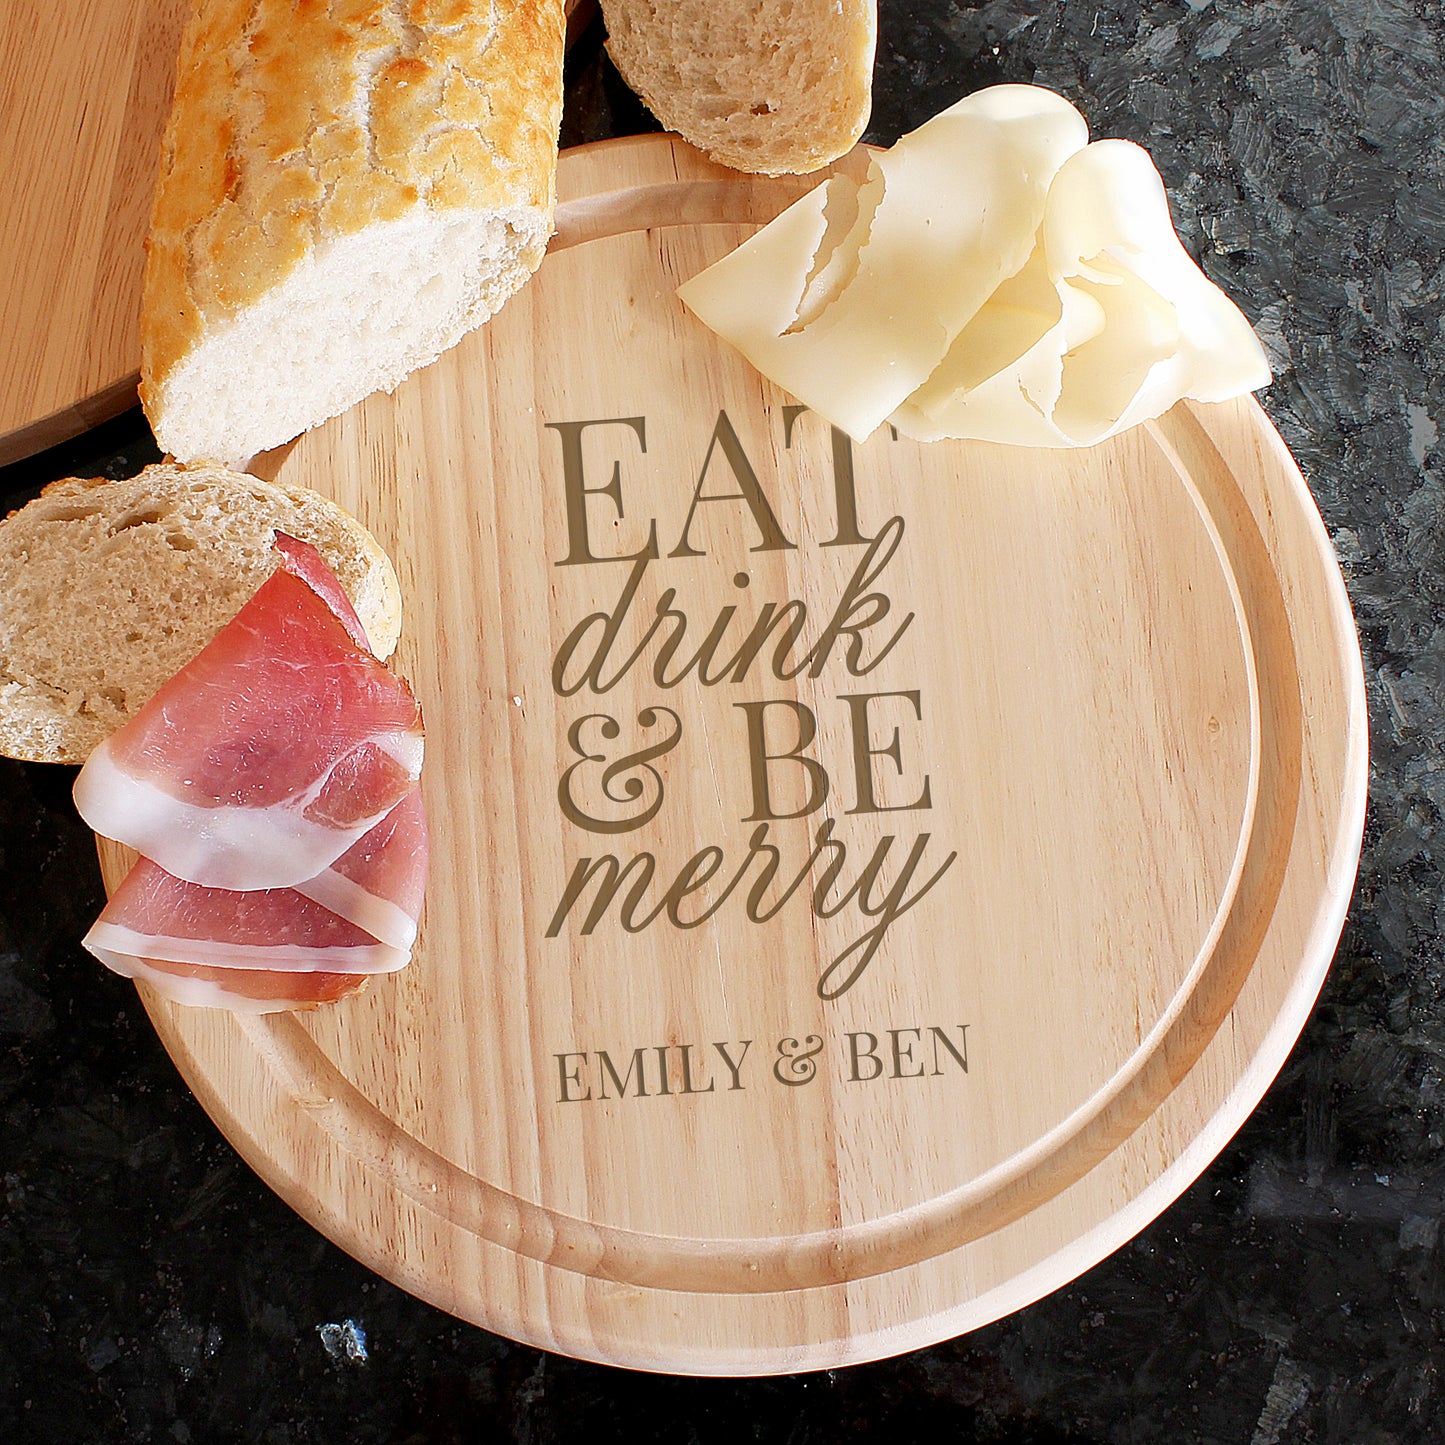 Personalised Eat Drink & Be Merry Rectangular Chopping Board - Personalise It!